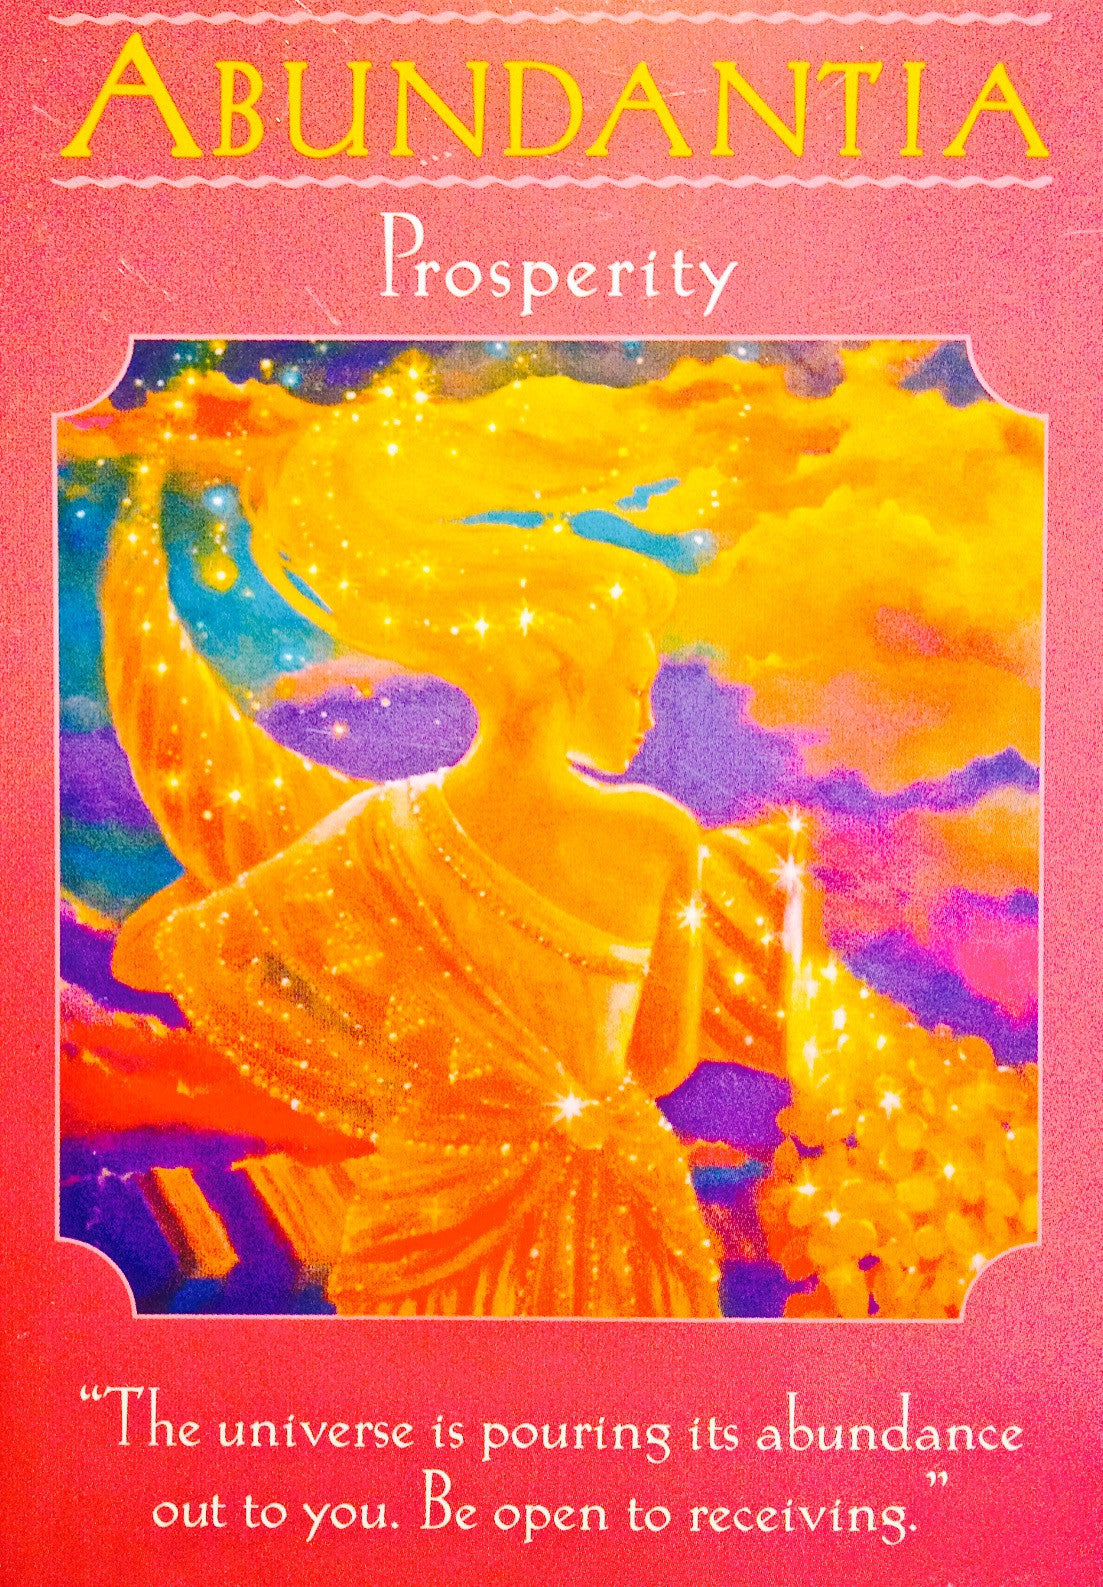 Abundantia ~ Prosperity: “The Universe is pouring its abundance out to you. Be open to receiving.”